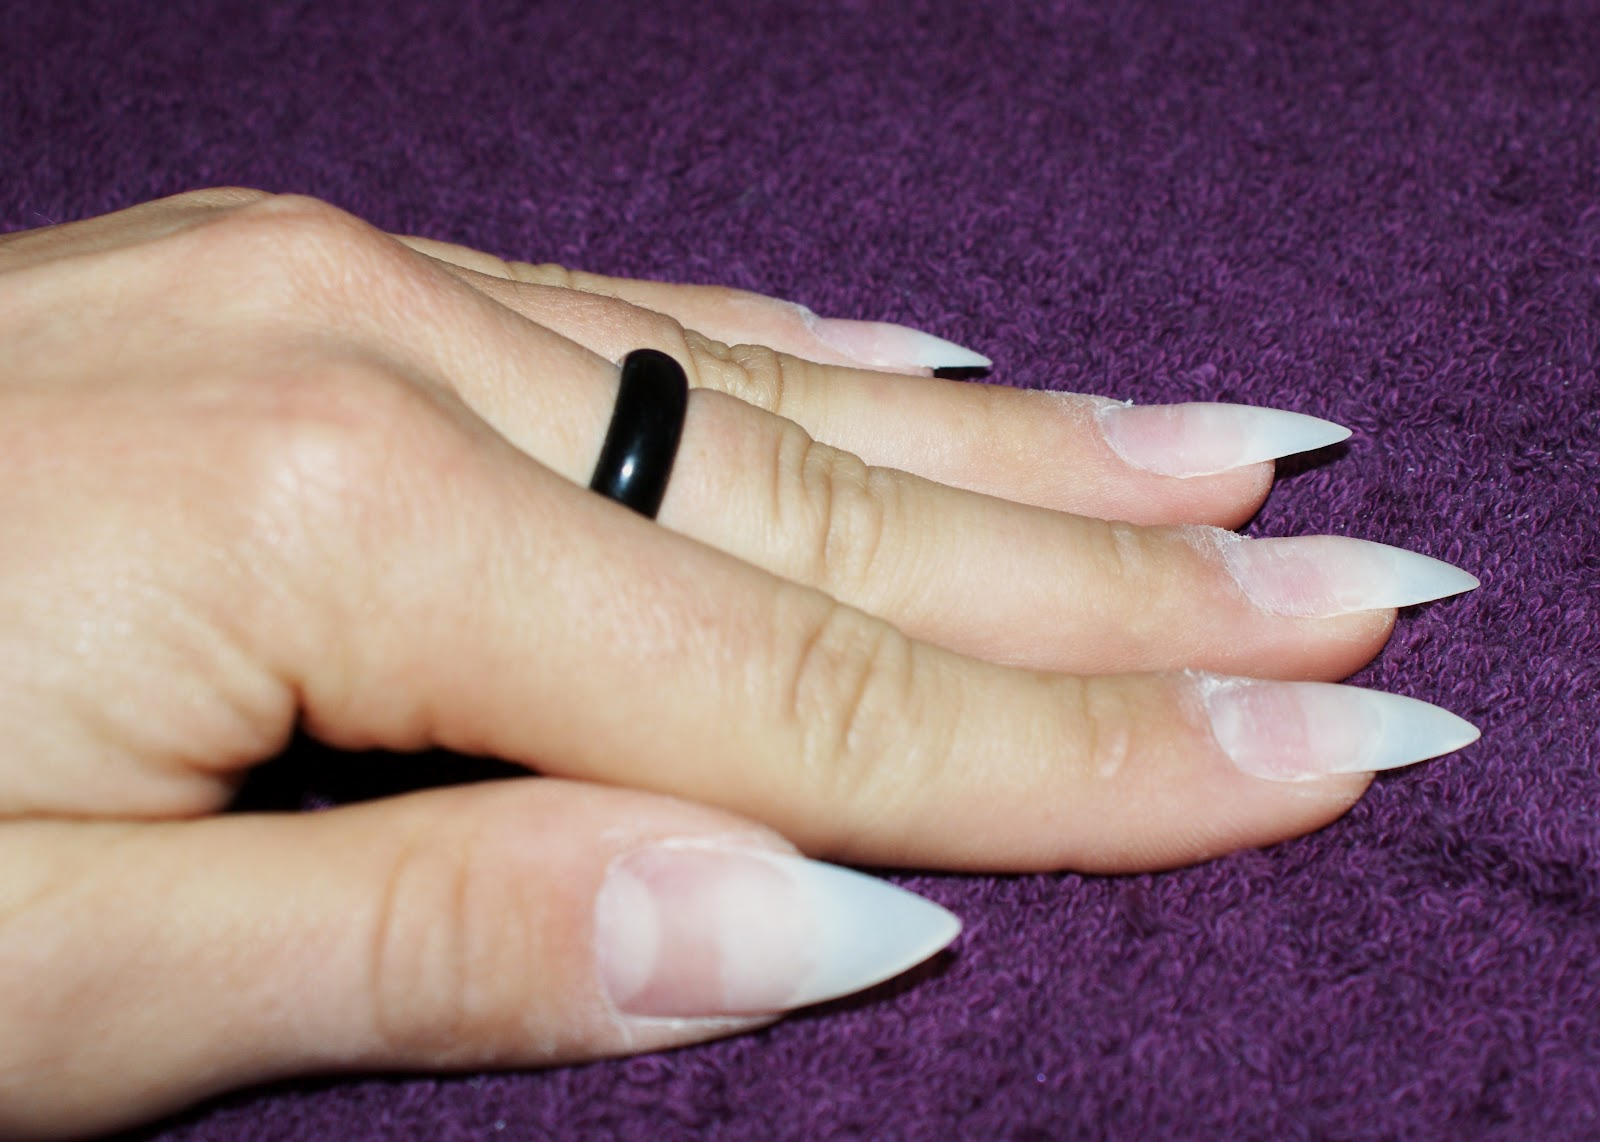 3. Pointy Nail Designs for Acrylic Nails - wide 1